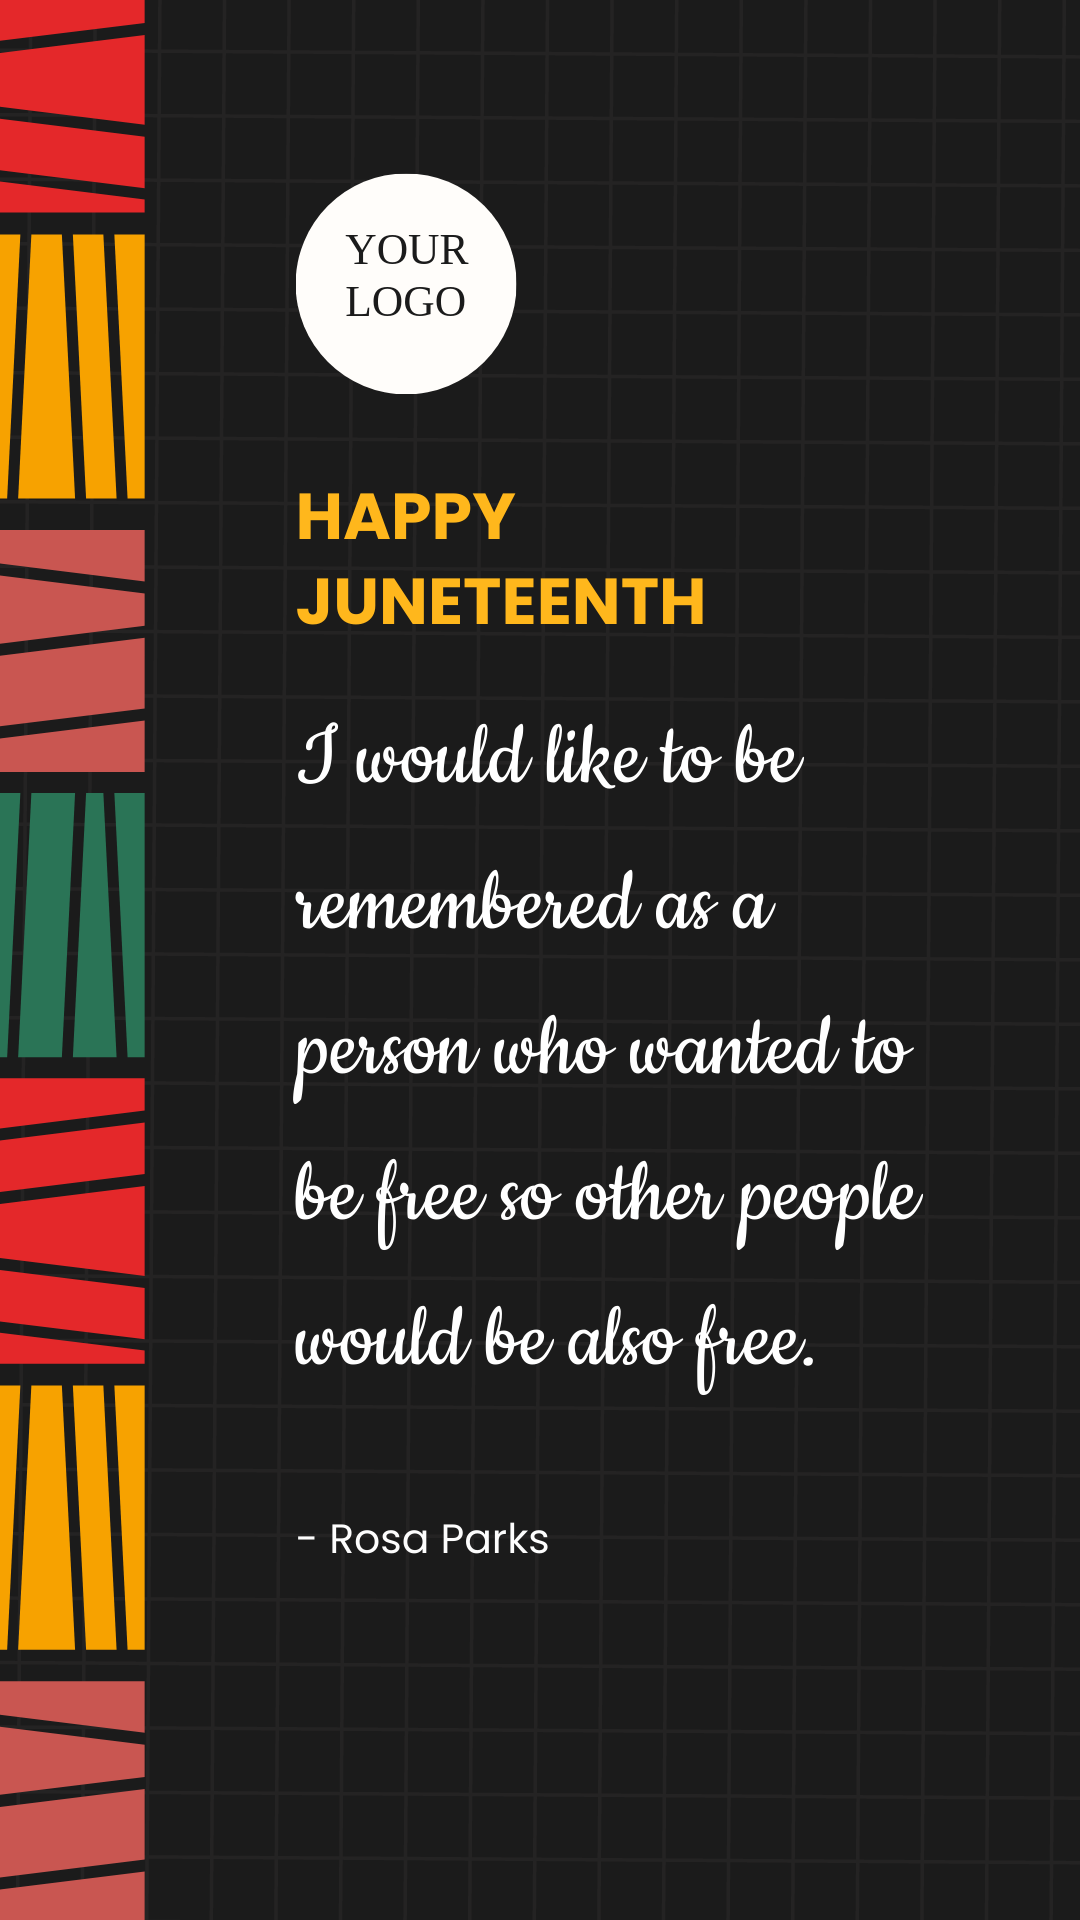 Juneteenth Quote for Work